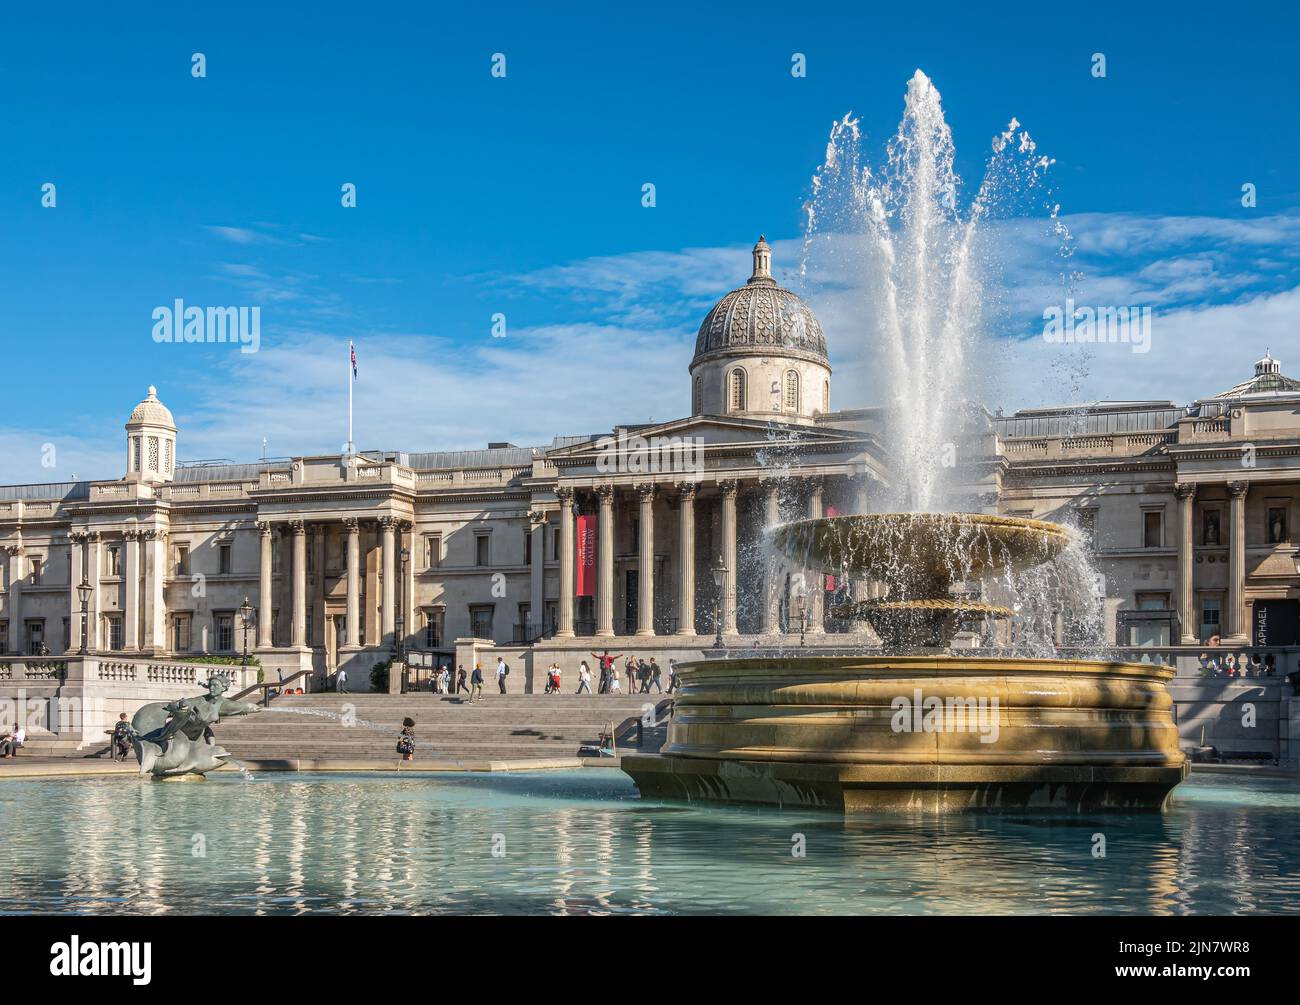 London, UK- July 4, 2022: Trafalgar Square. Wide view on Full blowing water Jellycoe fountain with National Gallery building in back under blue clouds Stock Photo